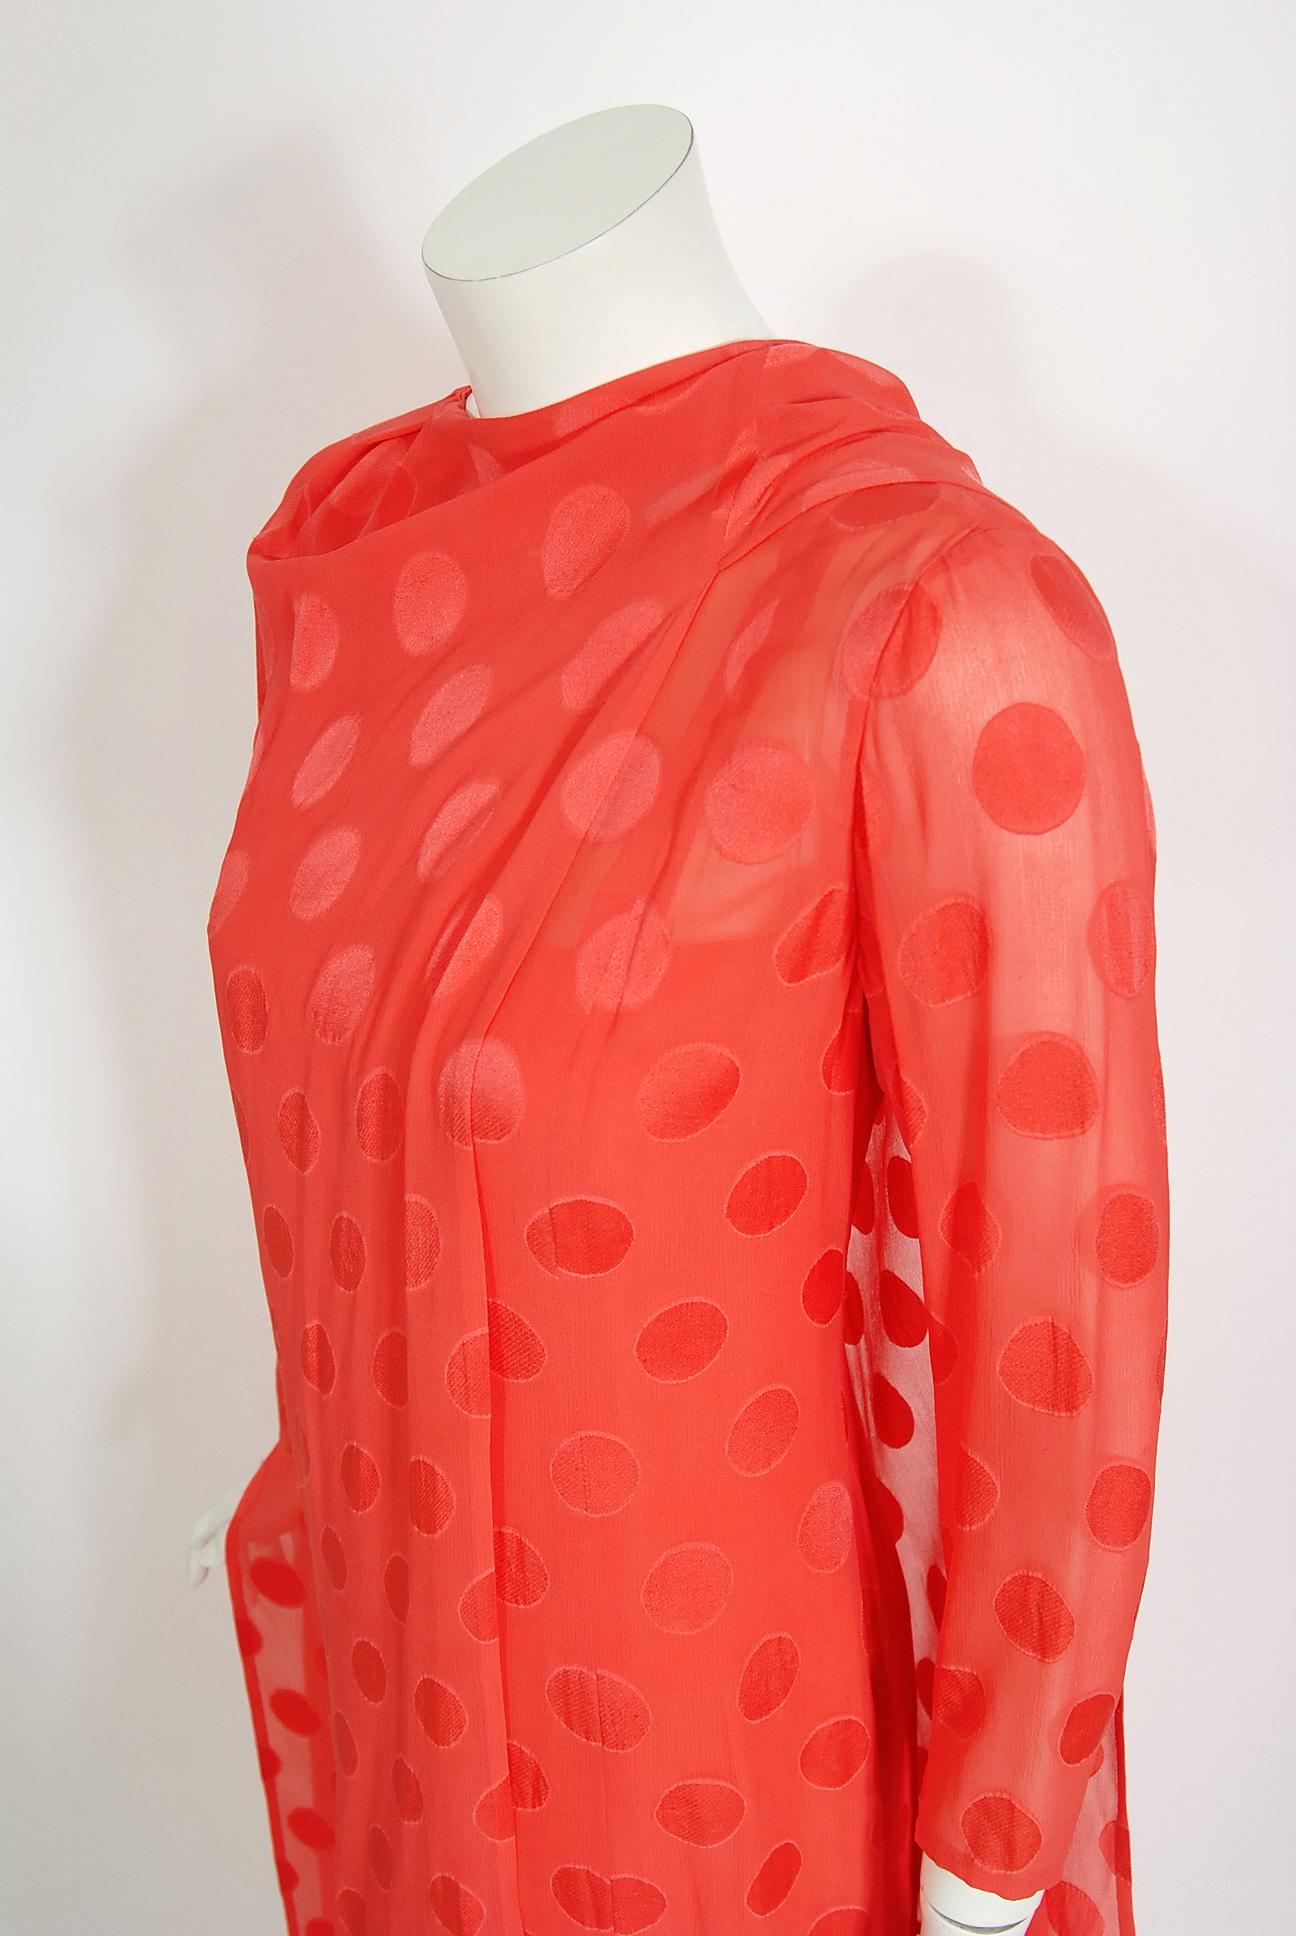 Vintage 1973 Givenchy Haute Couture Orange Dotted Silk Carwash-Hem Caftan Gown For Sale 1